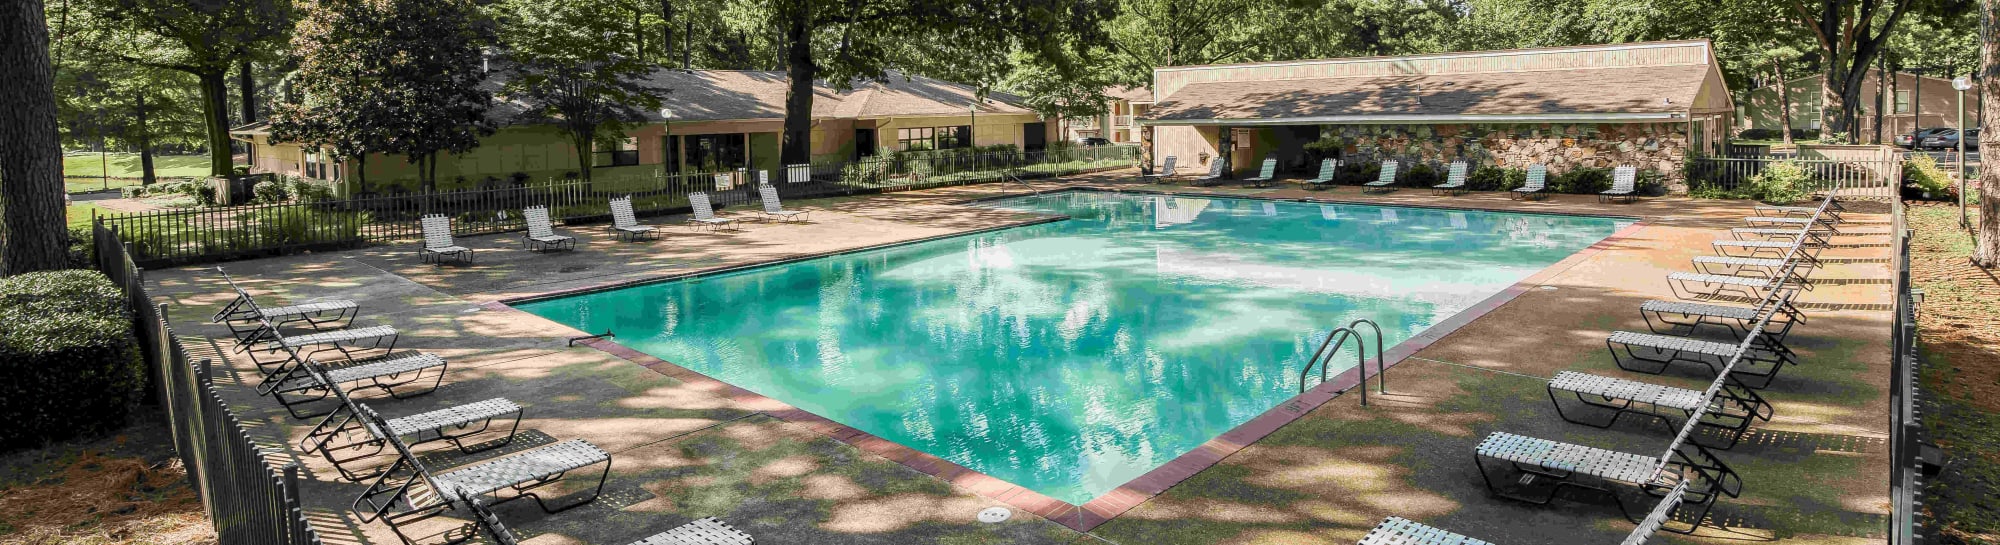 Amenities at Sycamore Lake in Memphis, Tennessee